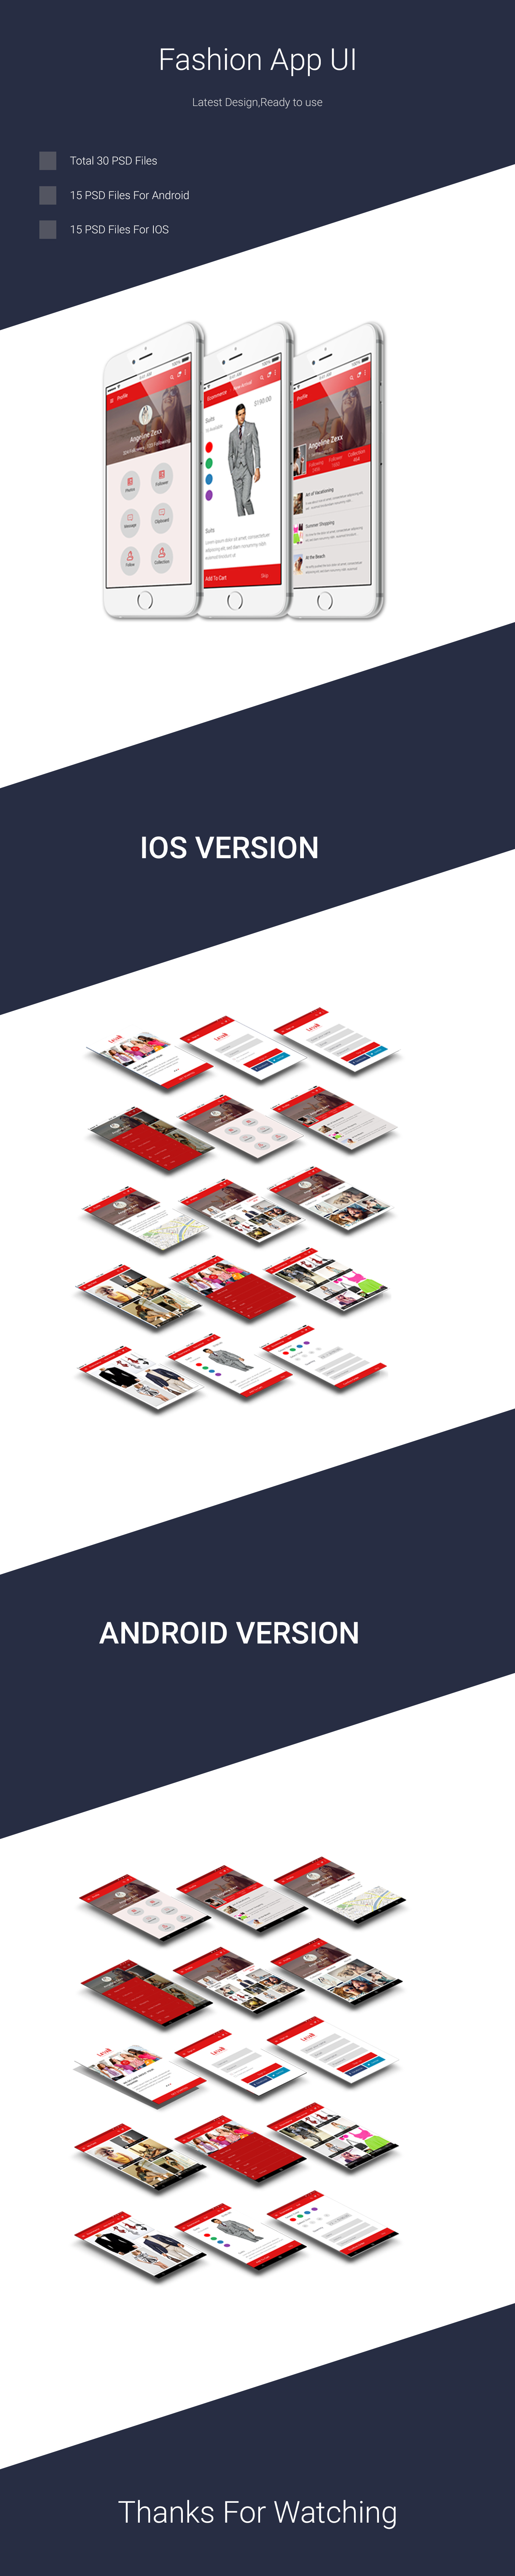 android app design Display elements Form gallery google infographic ios kitkat material mobile modern Os